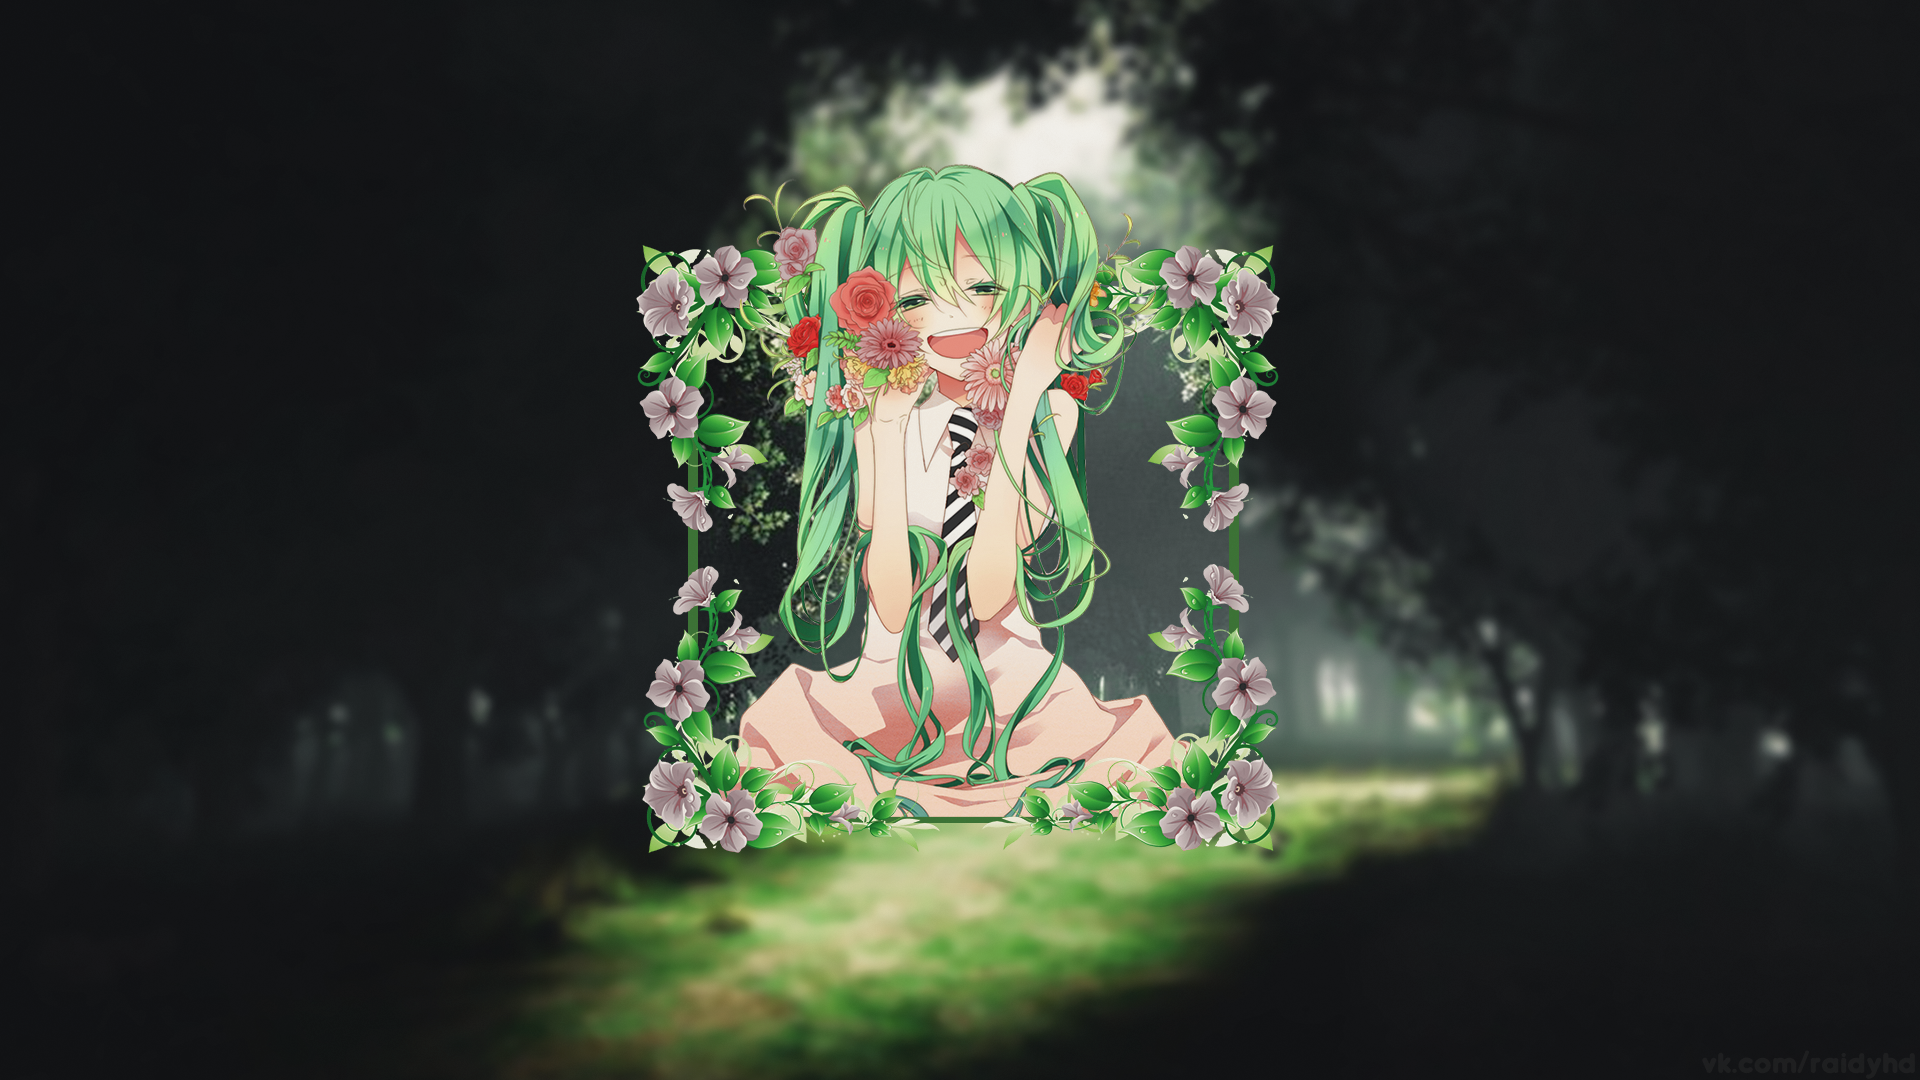 Anime 1920x1080 anime Hatsune Miku flowers picture-in-picture